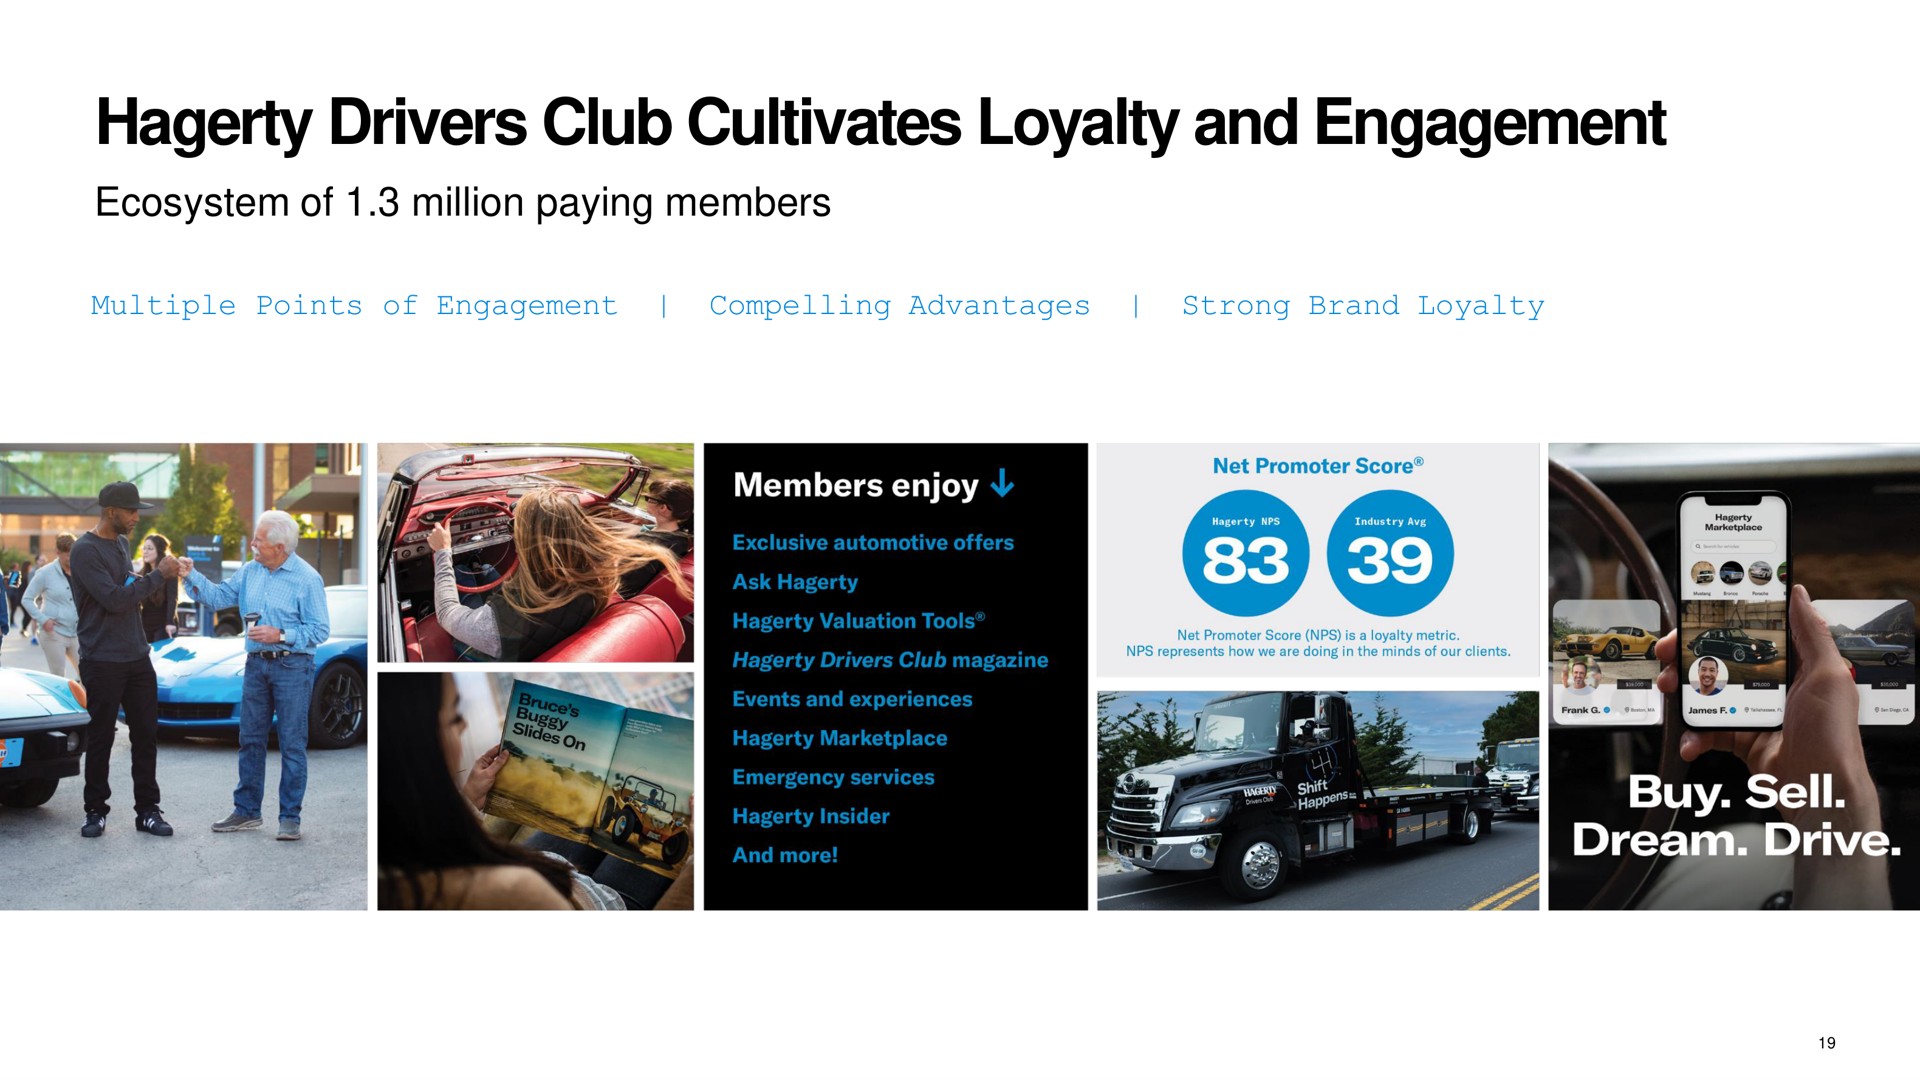 drivers club cultivates loyalty and engagement | Hagerty